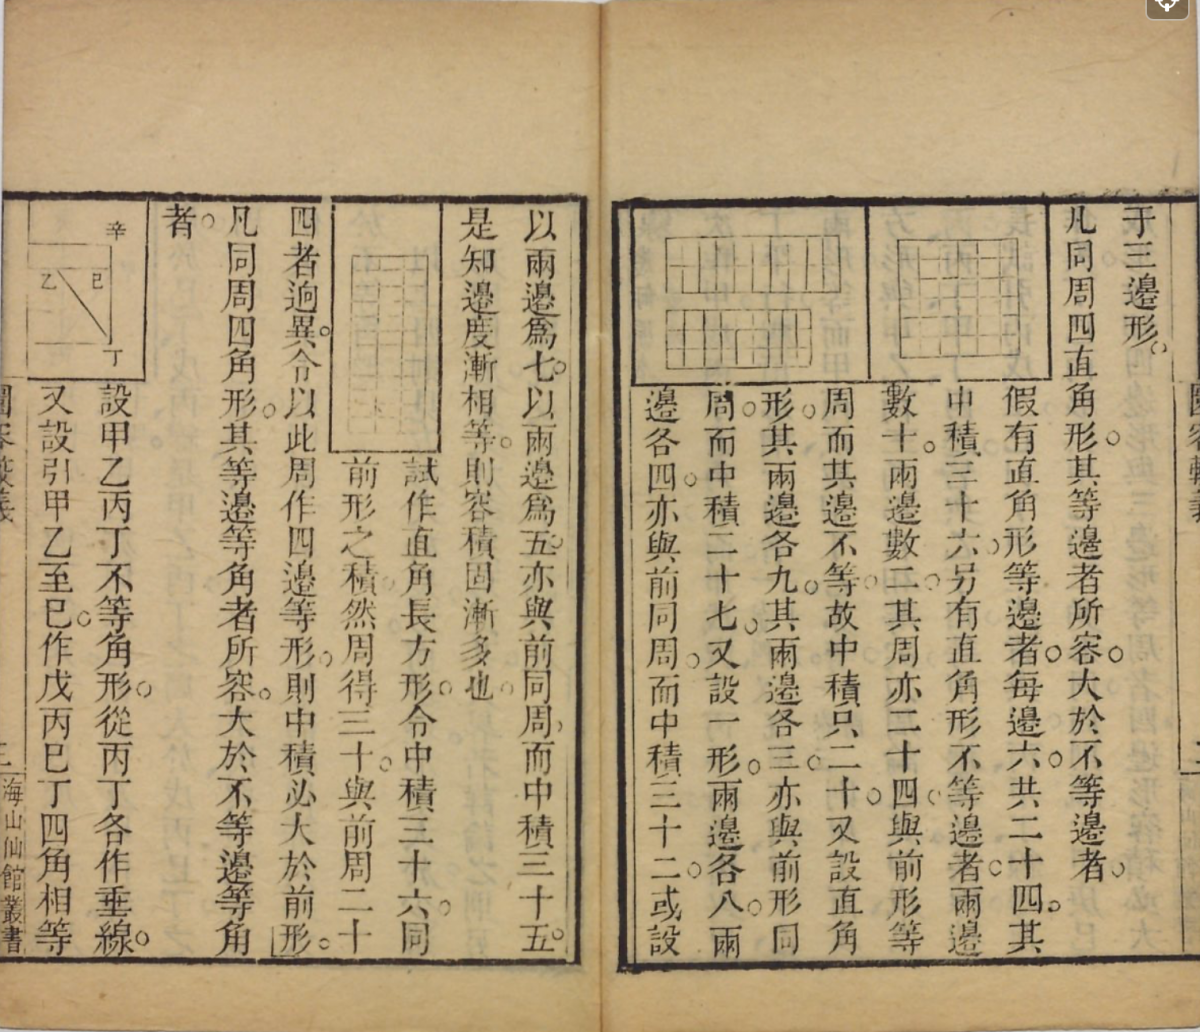 Pages from the 1847 printing of Matteo Ricci's and Li Zhizao's Yuan rong jiao yi.